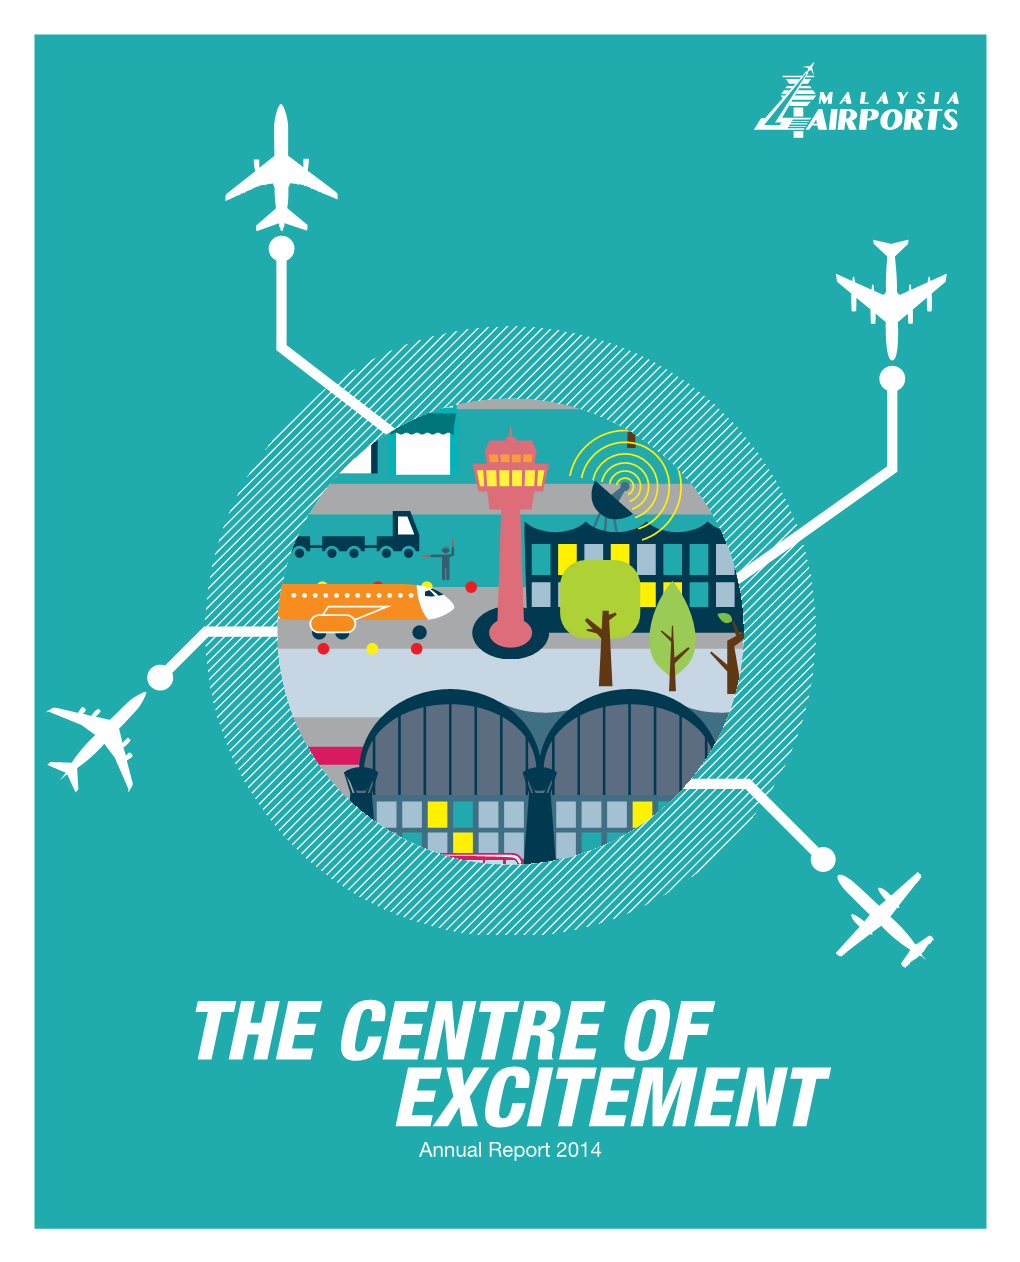 THE CENTRE of EXCITEMENT Annual Report 2014 2 Malaysia Airports Holdings Berhad • Annual Report 2014 16Th ANNUAL GENERAL MEETING